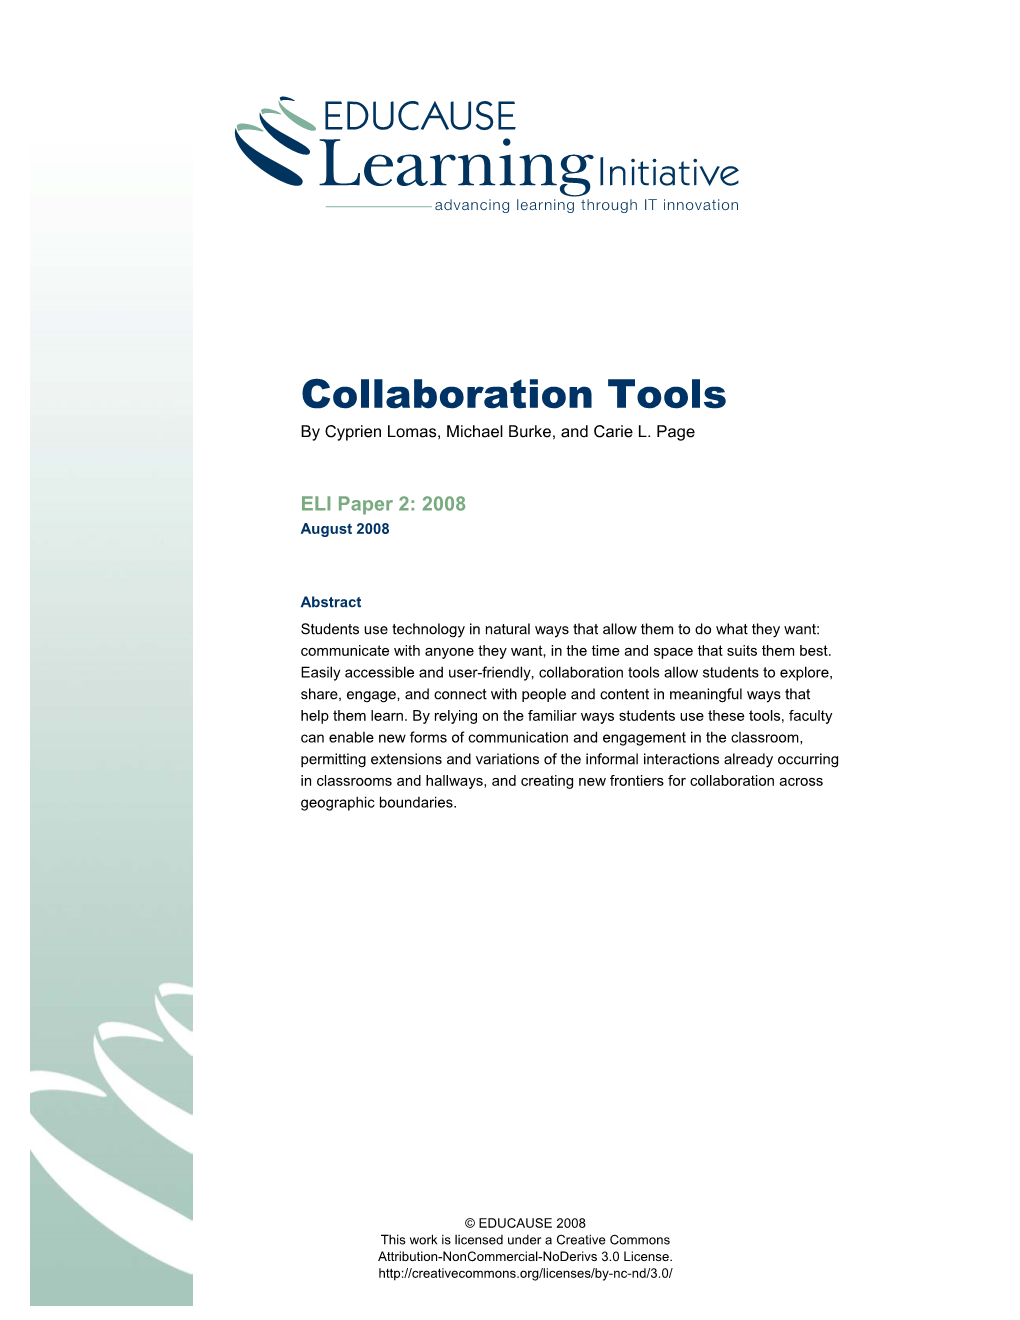 Collaboration Tools by Cyprien Lomas, Michael Burke, and Carie L